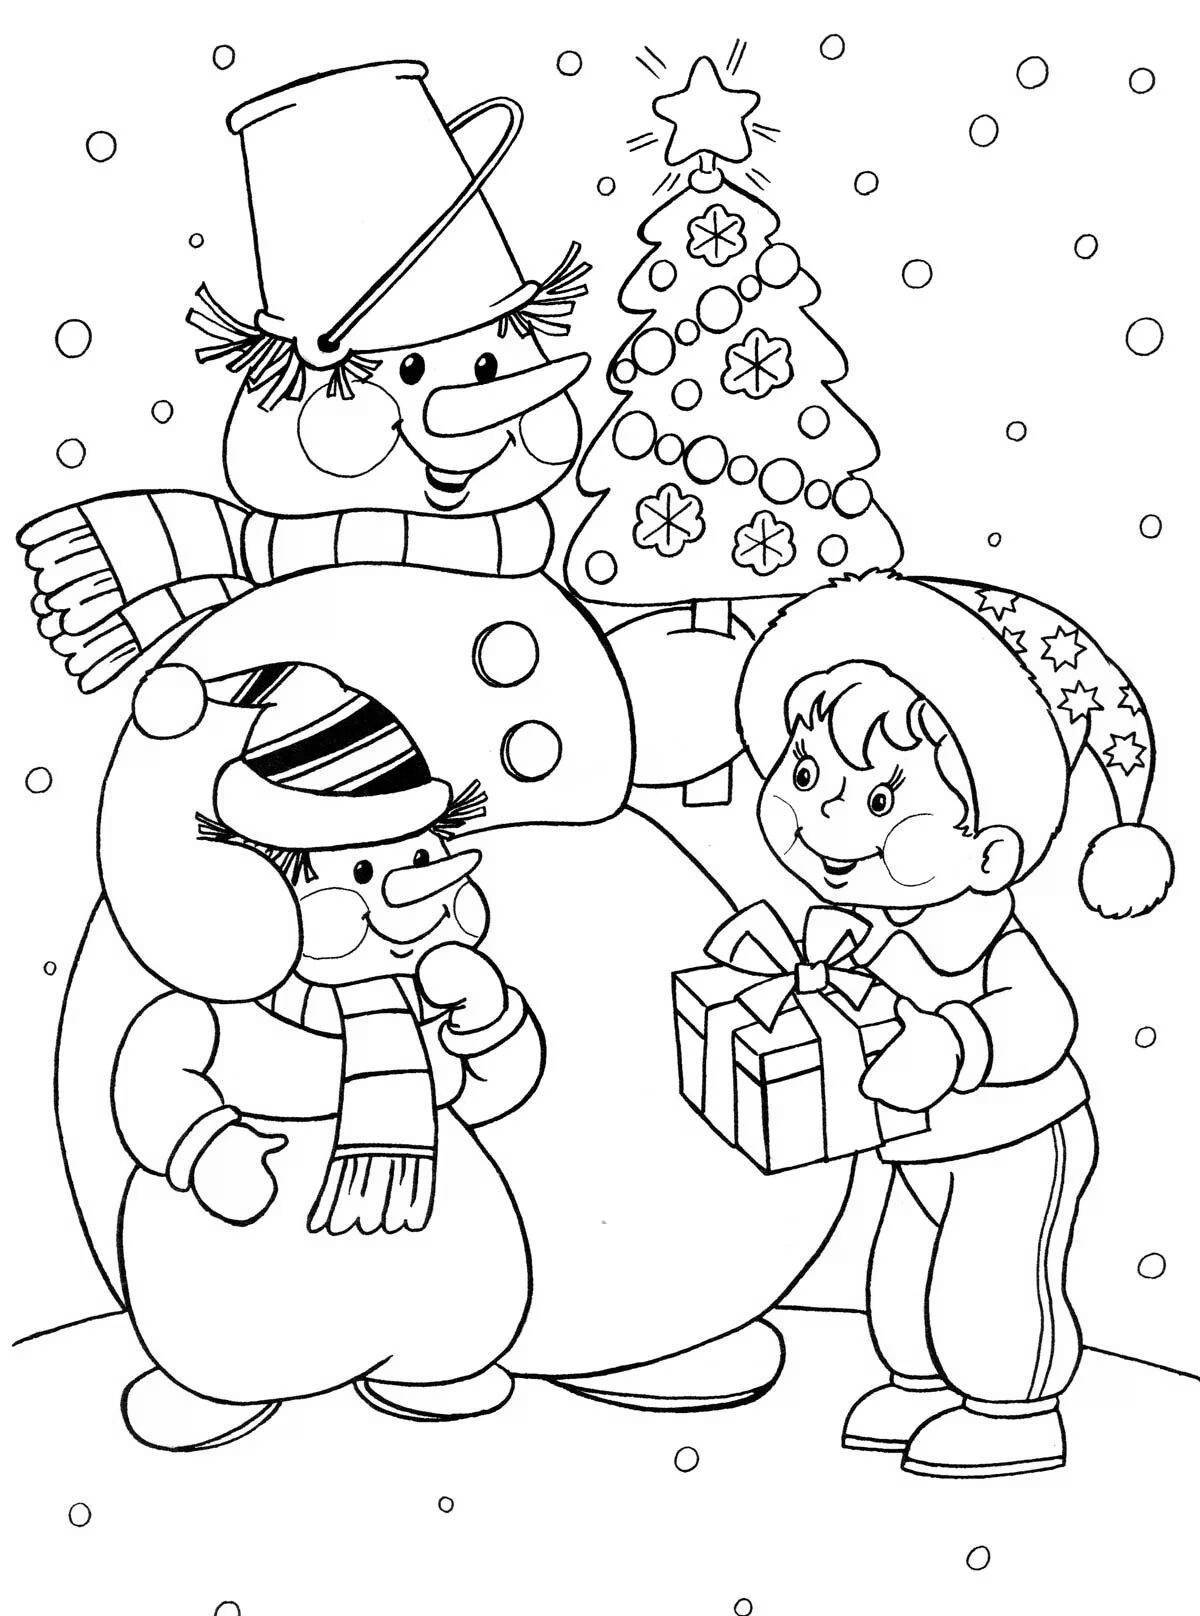 Unique Christmas coloring book for kids 6-7 years old